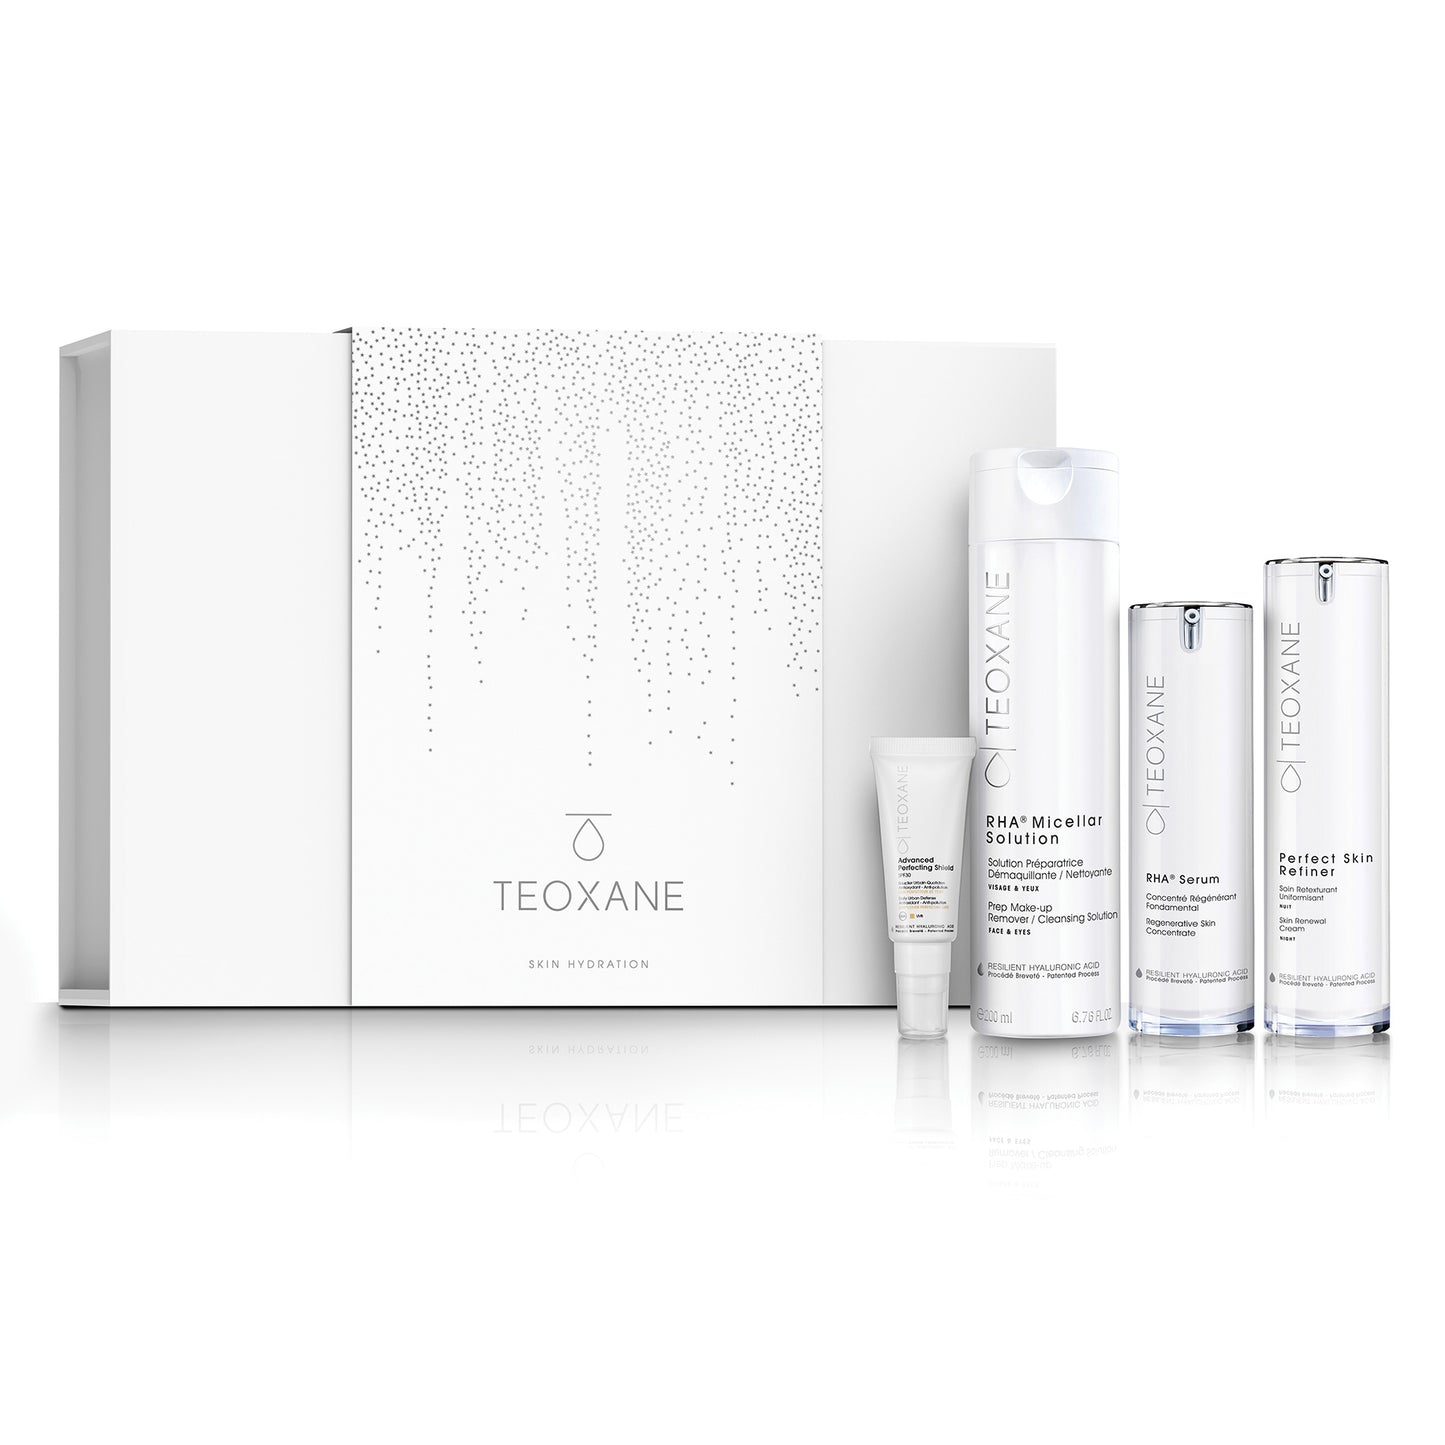 Teoxane Skin Hydration - Gift Collection